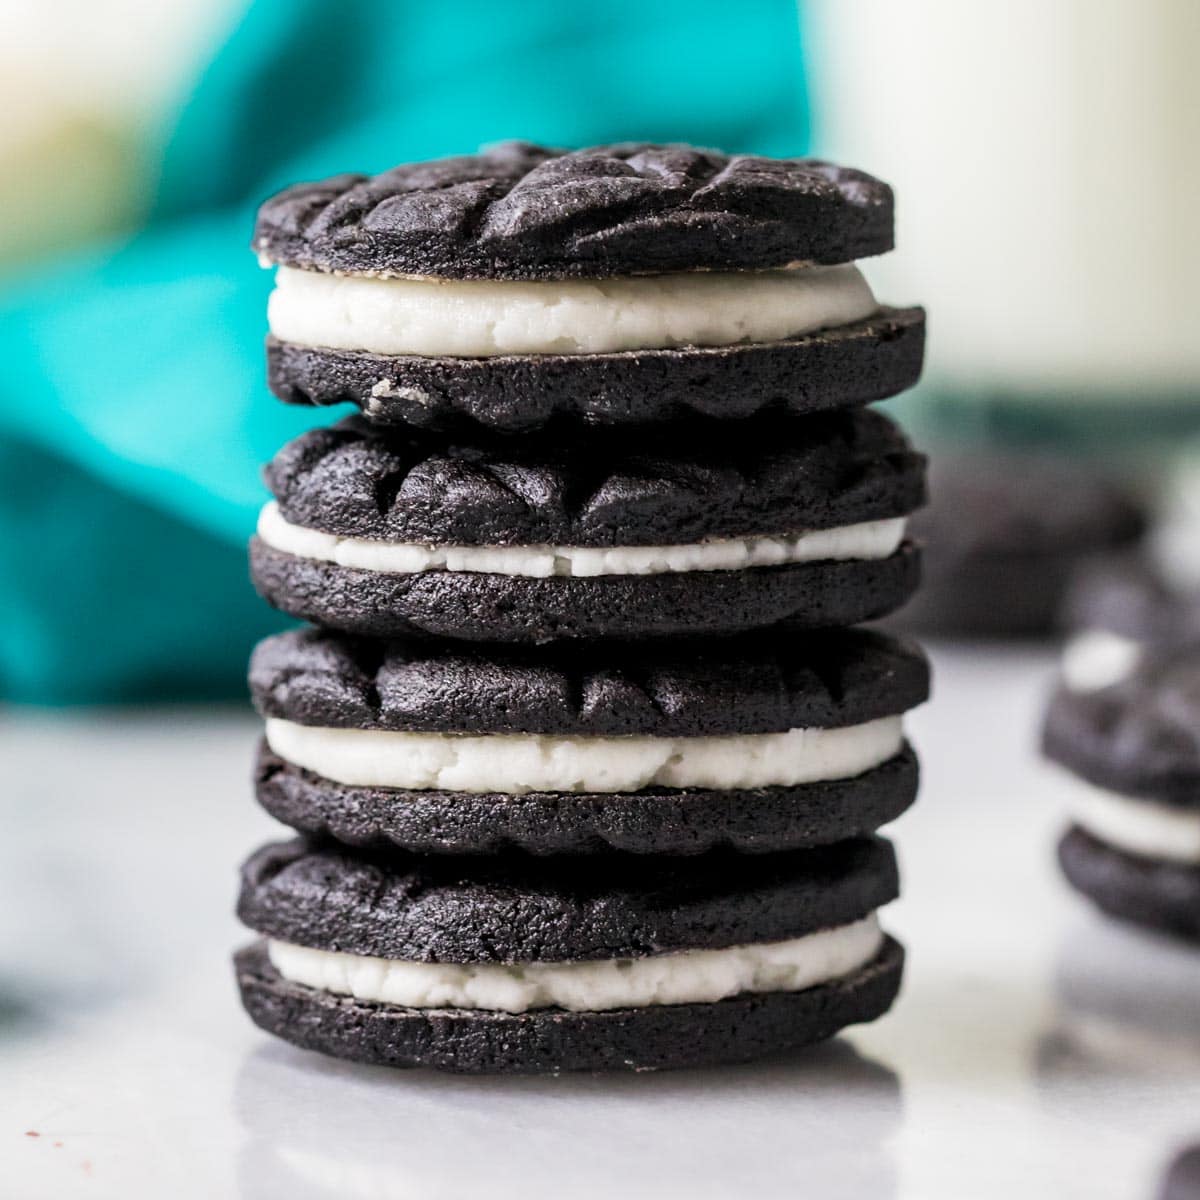 Oreos Biscuit